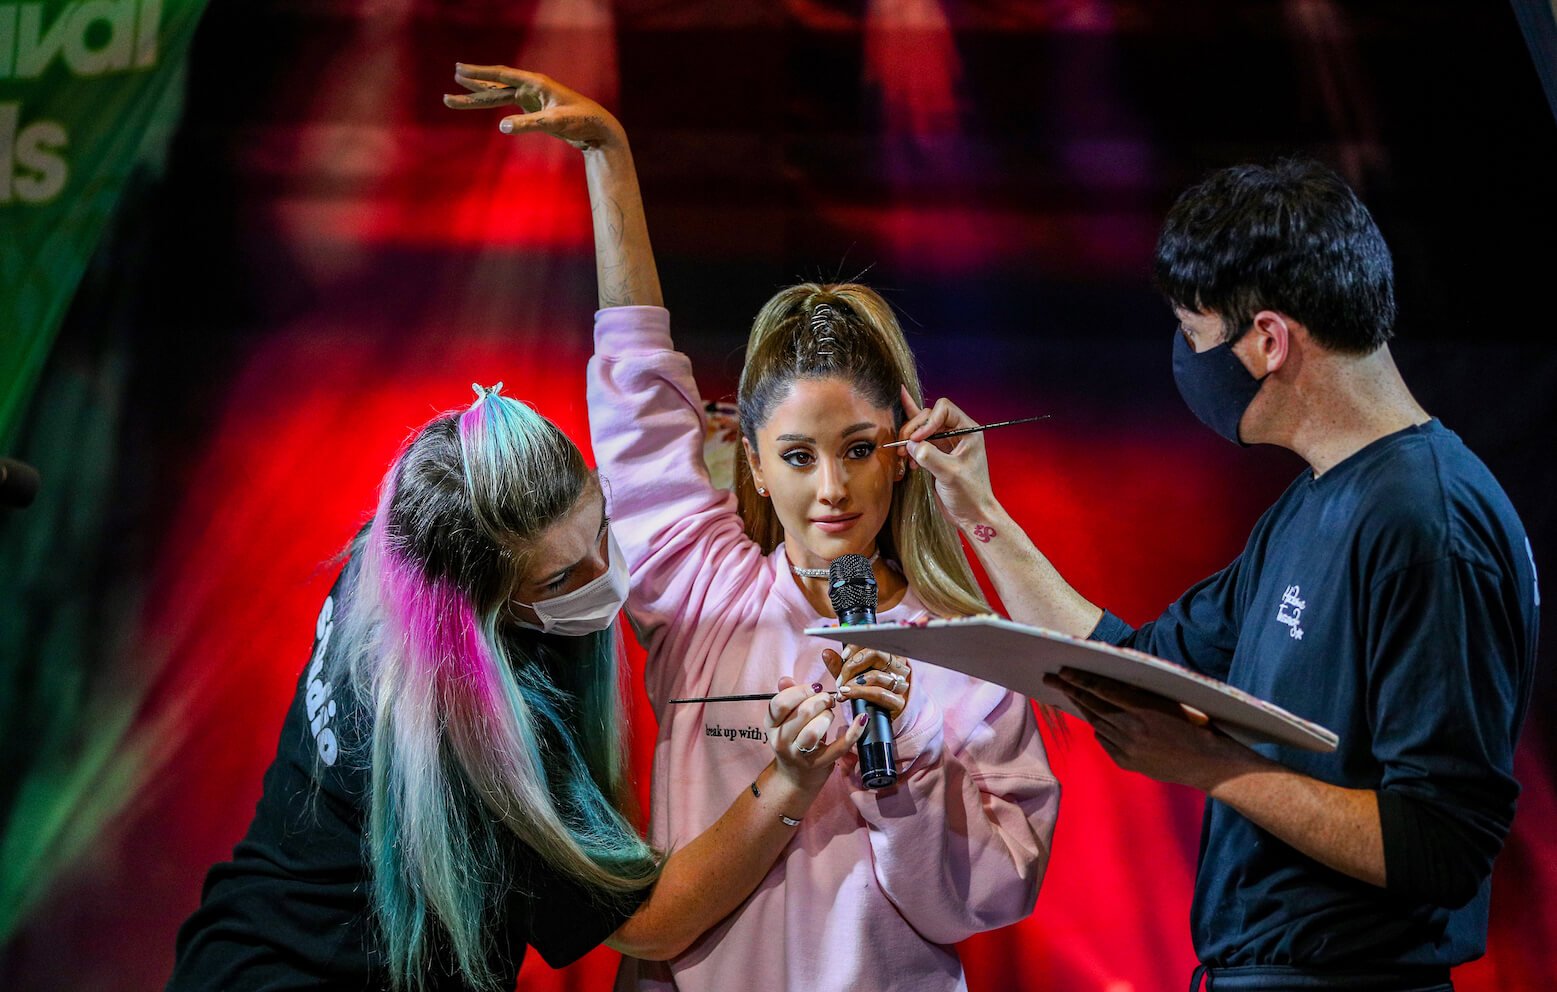 Ariana Grande holding her arm up in a pose while two makeup artists fix her face makeup on stage